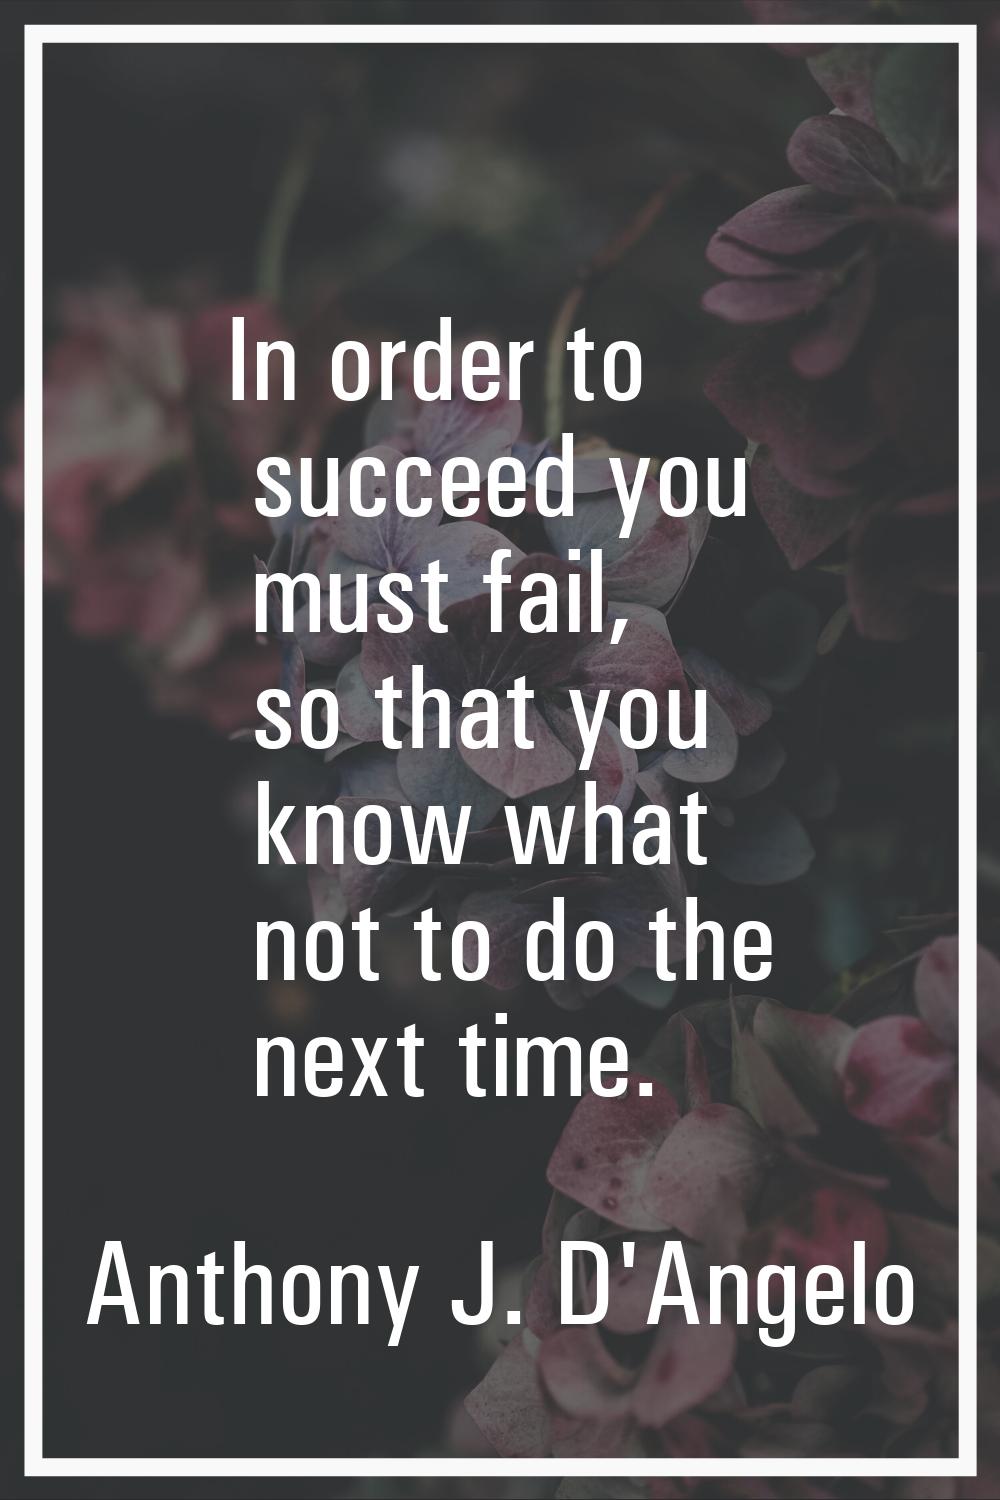 In order to succeed you must fail, so that you know what not to do the next time.